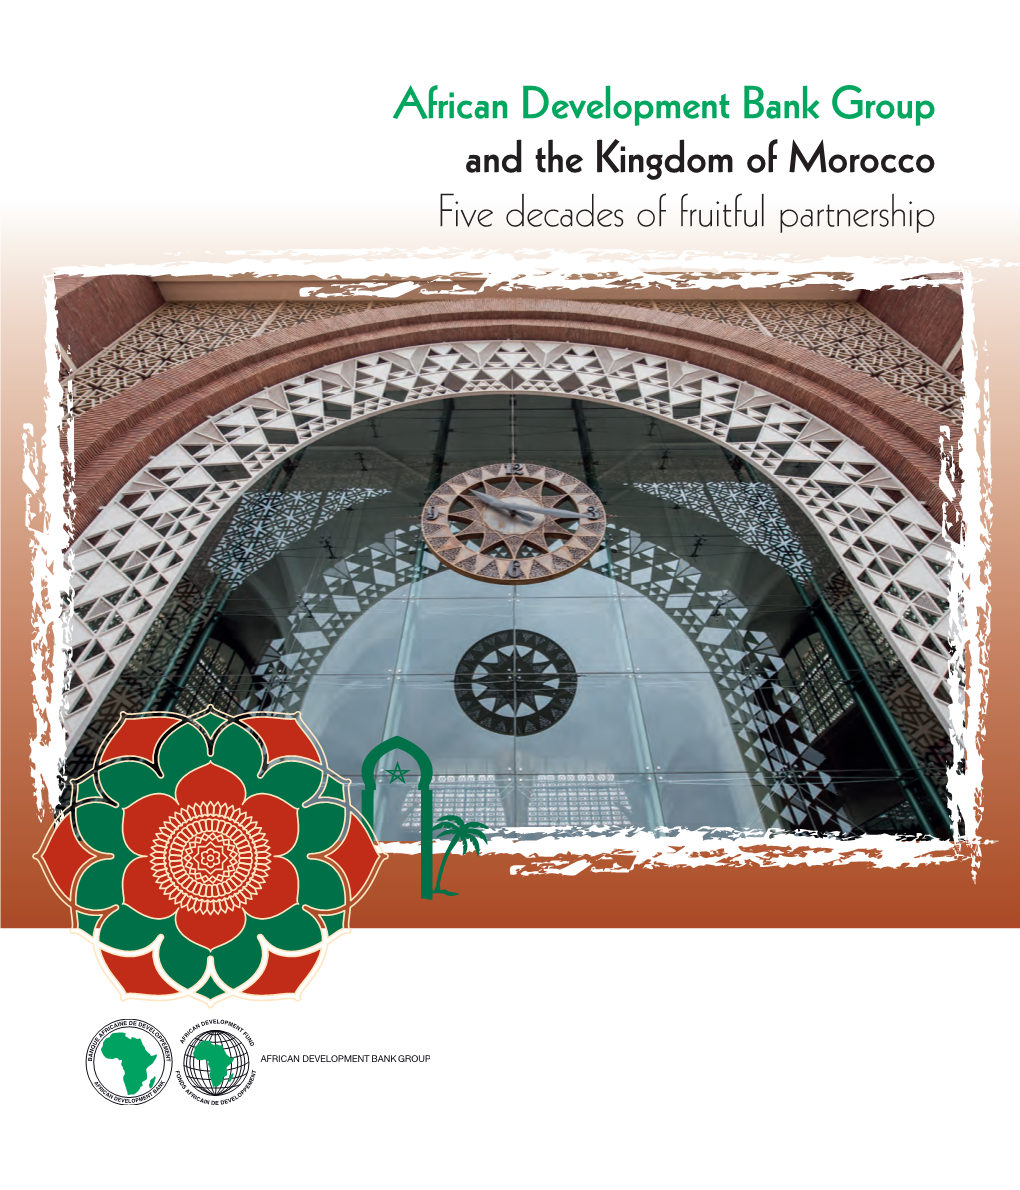 African Development Bank Group and the Kingdom of Morocco